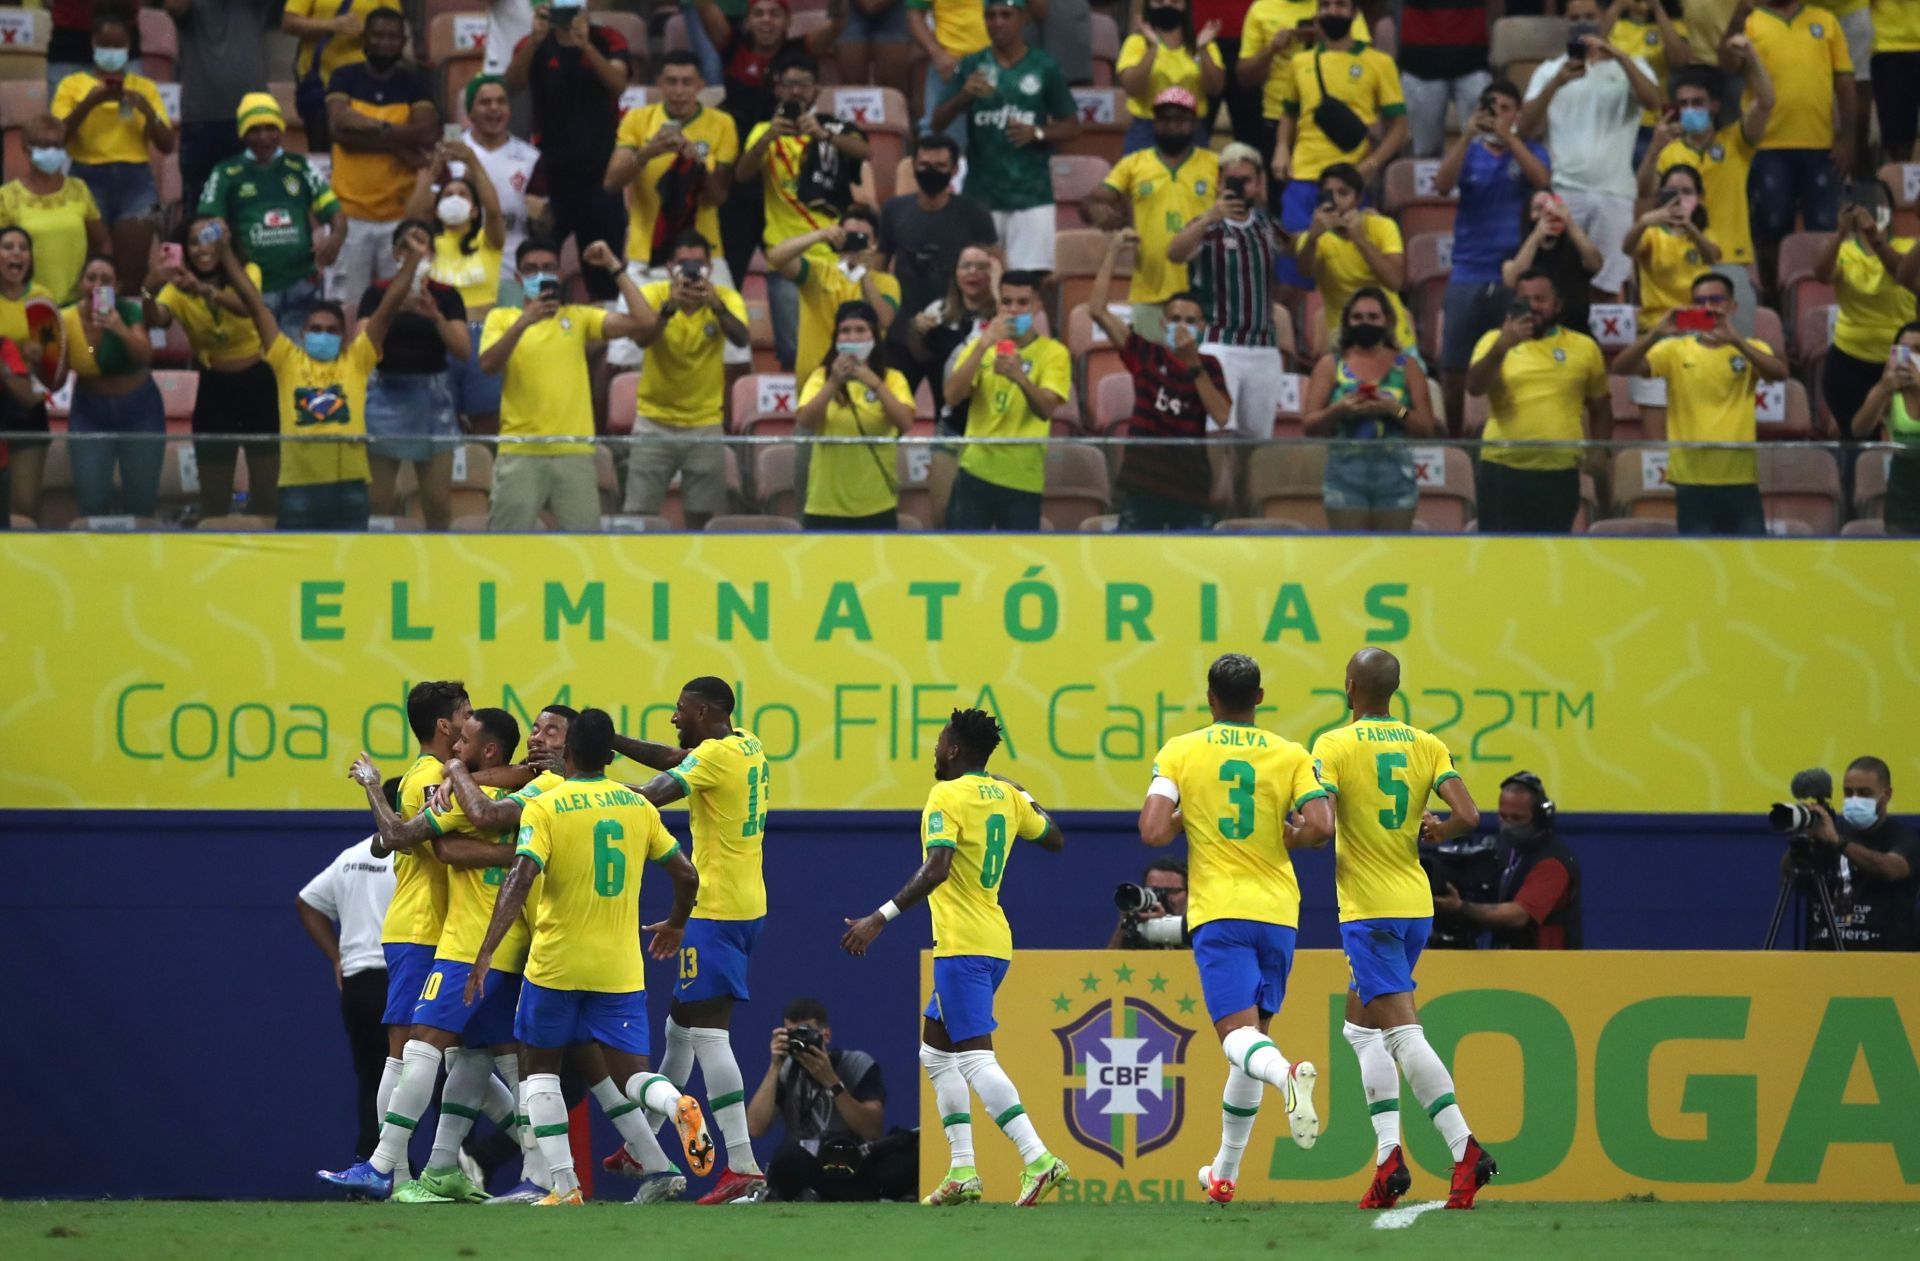 Barring their goalless draw to Colombia last month, Brazil have been unstoppable.